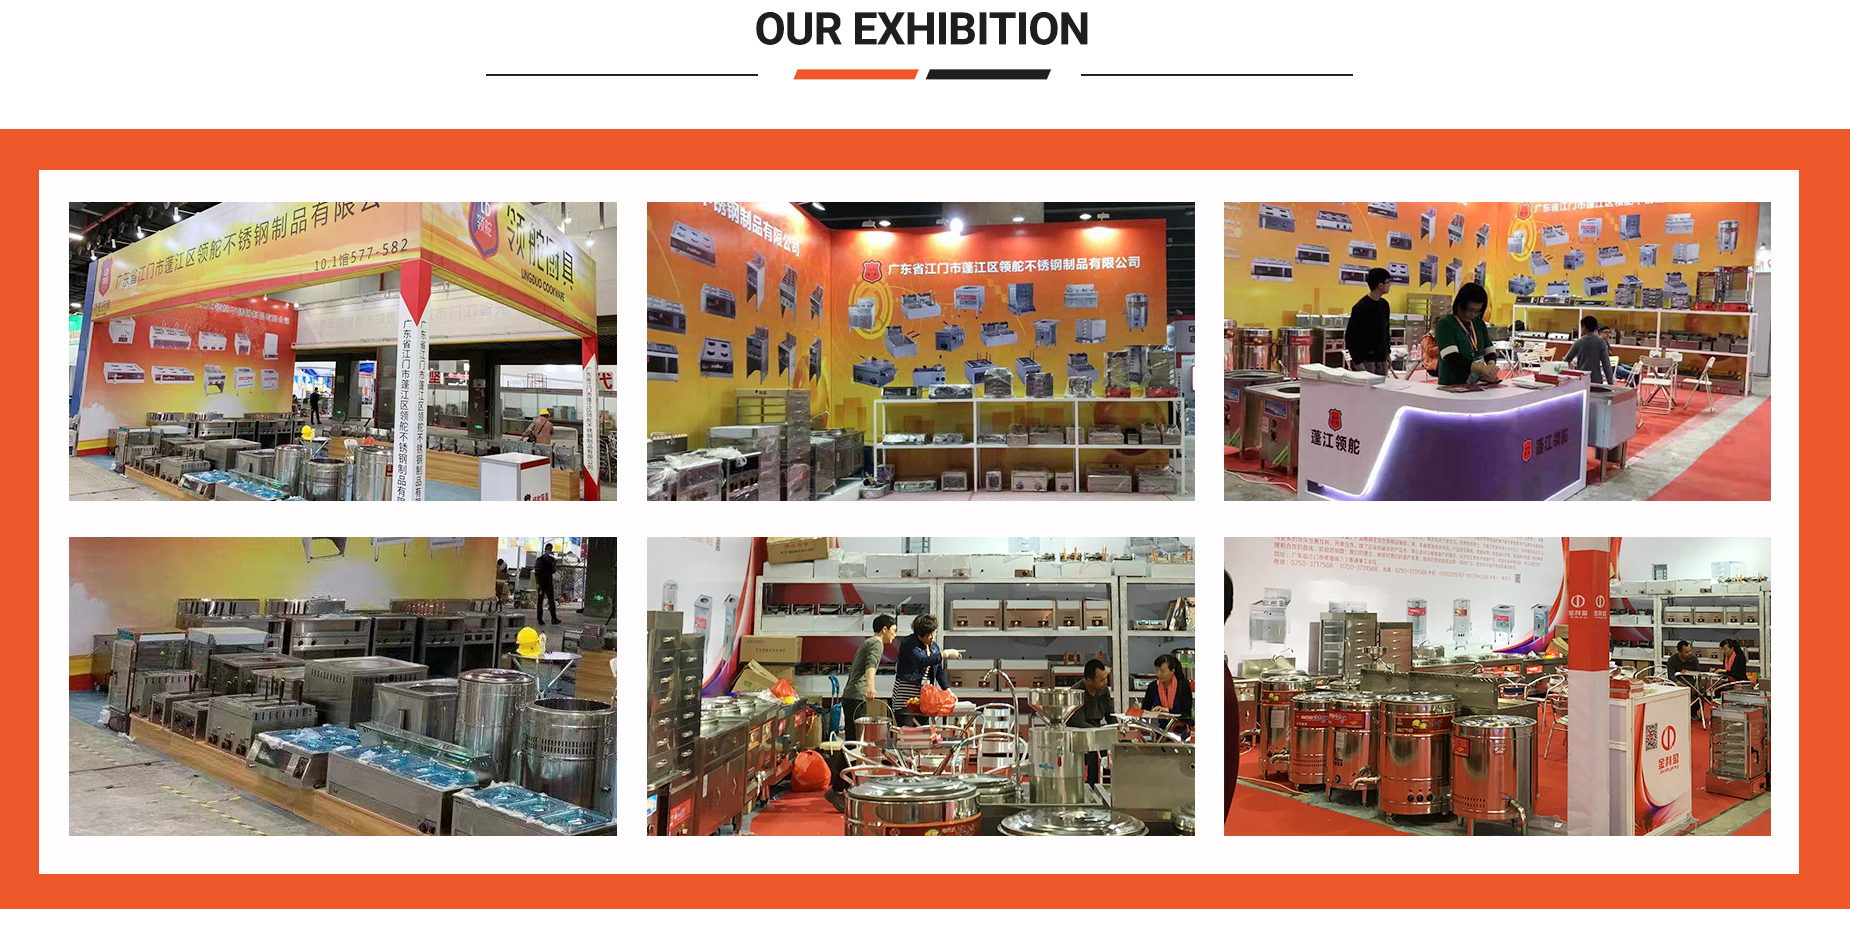 Our Exhibition